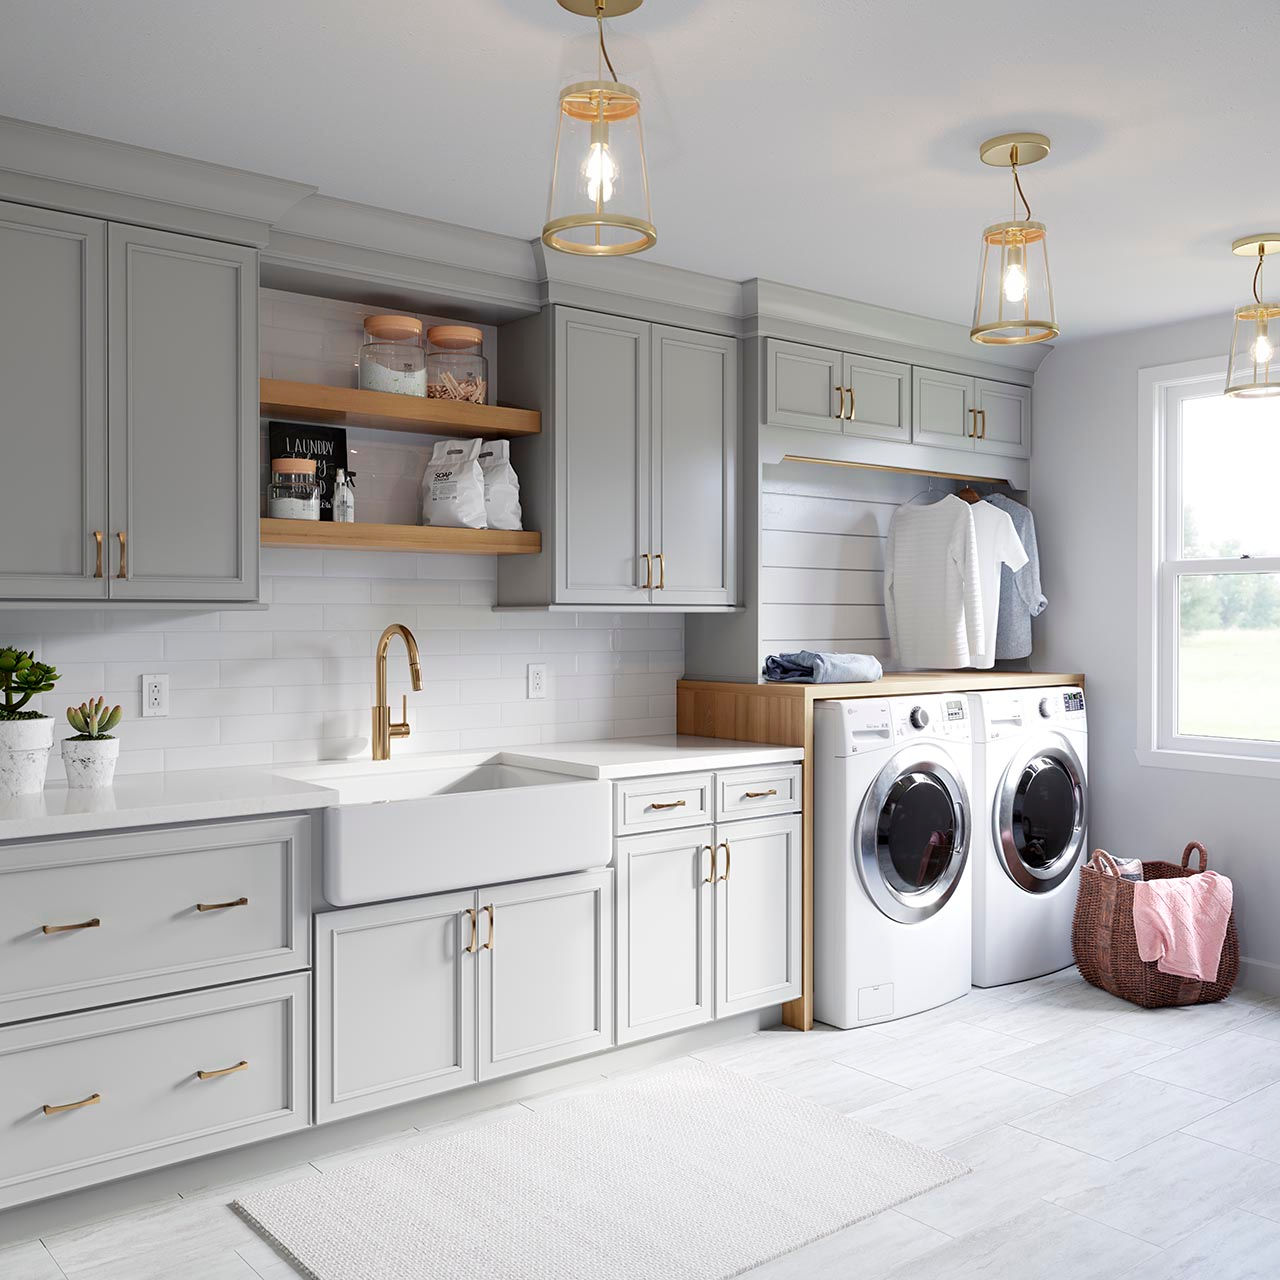 Creating Your Dream Laundry Room with Built-Ins